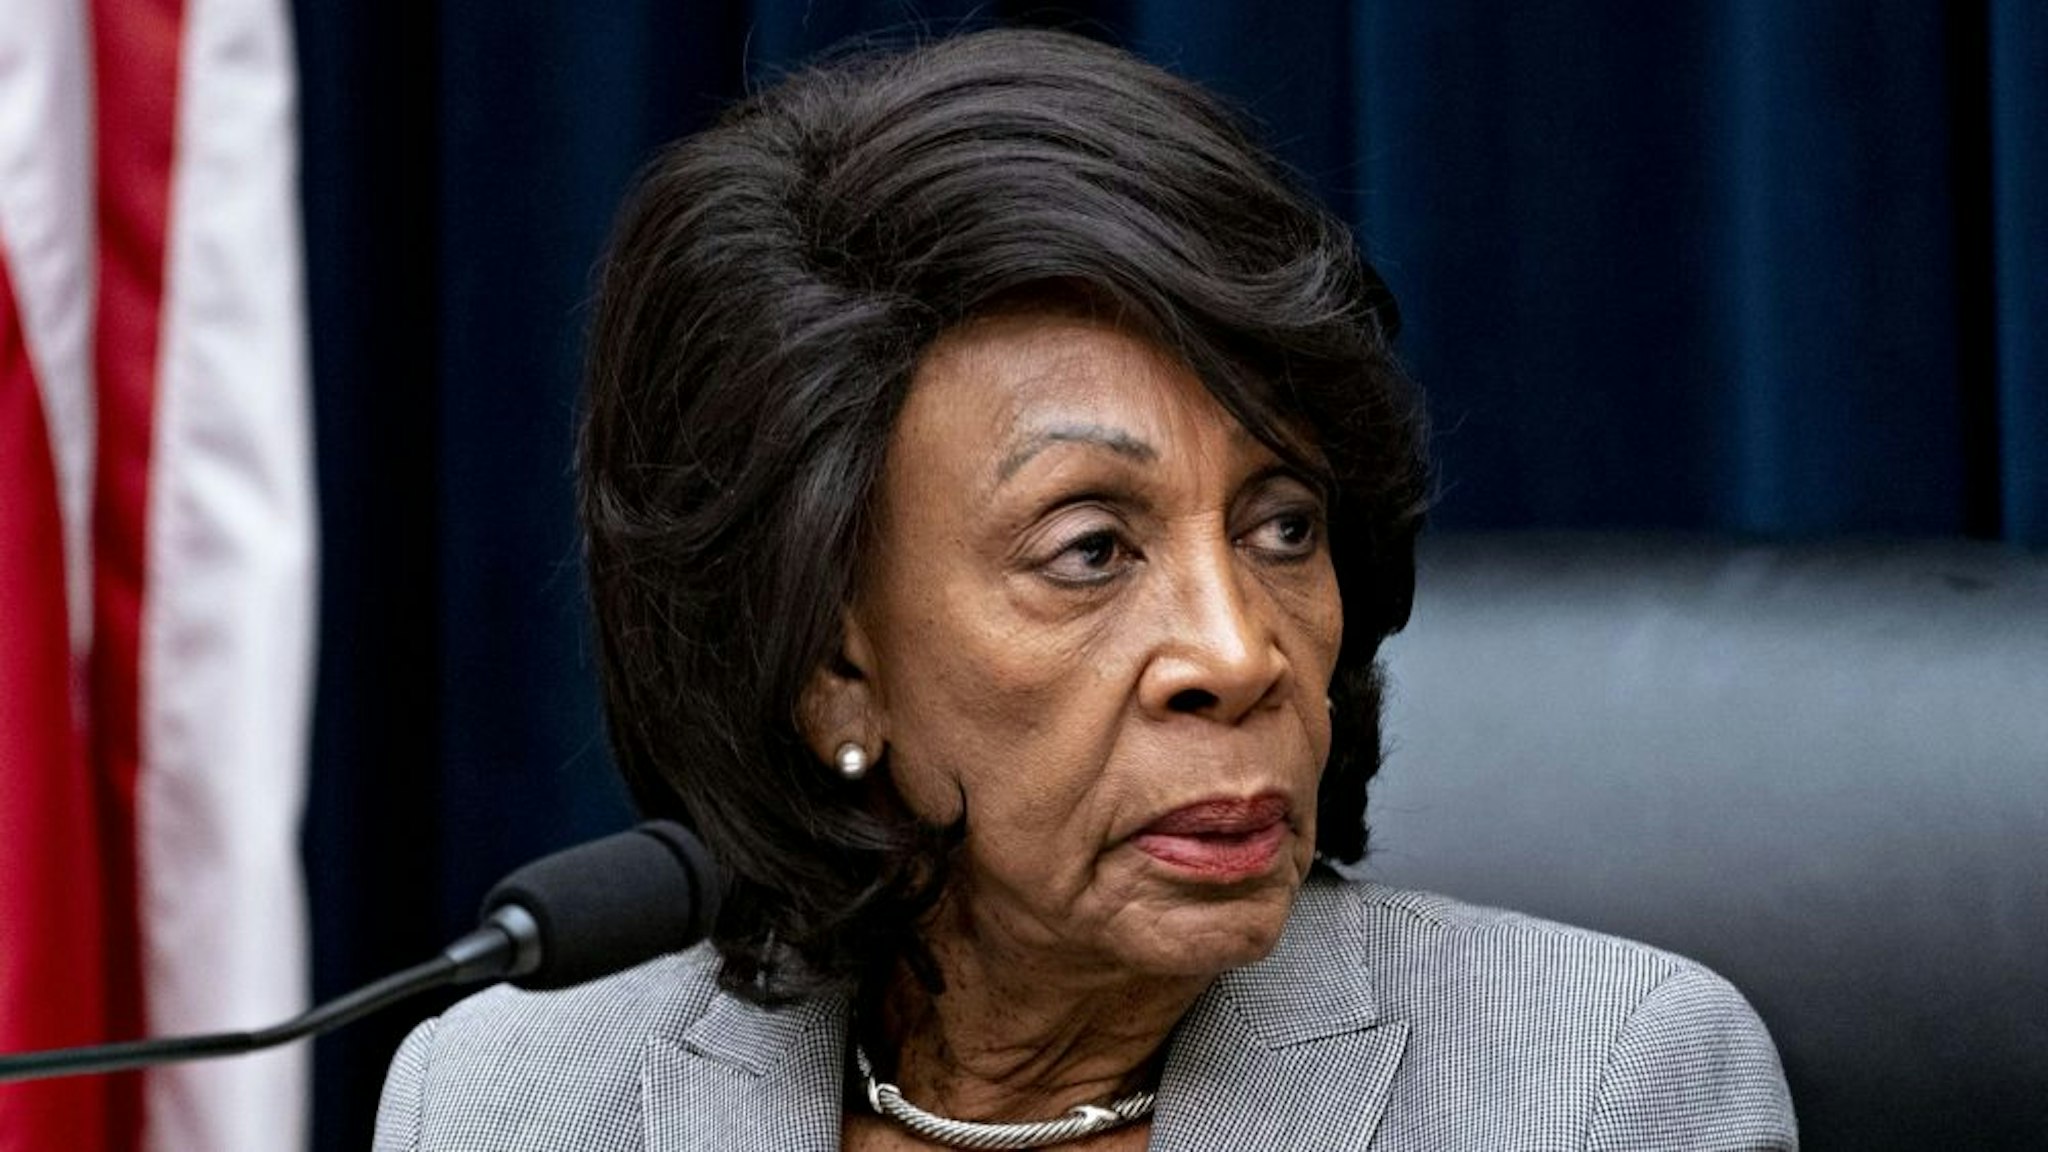 Representative Maxine Waters, a Democrat from California and chairwoman of the House Financial Services Committee, listens during a hearing with Steven Mnuchin, U.S. Treasury secretary, not pictured, in Washington, D.C., U.S., on Thursday, Dec. 5, 2019. Mnuchin said he and the Federal Reserve Chairman dont expect the U.S. to create a digital currency.